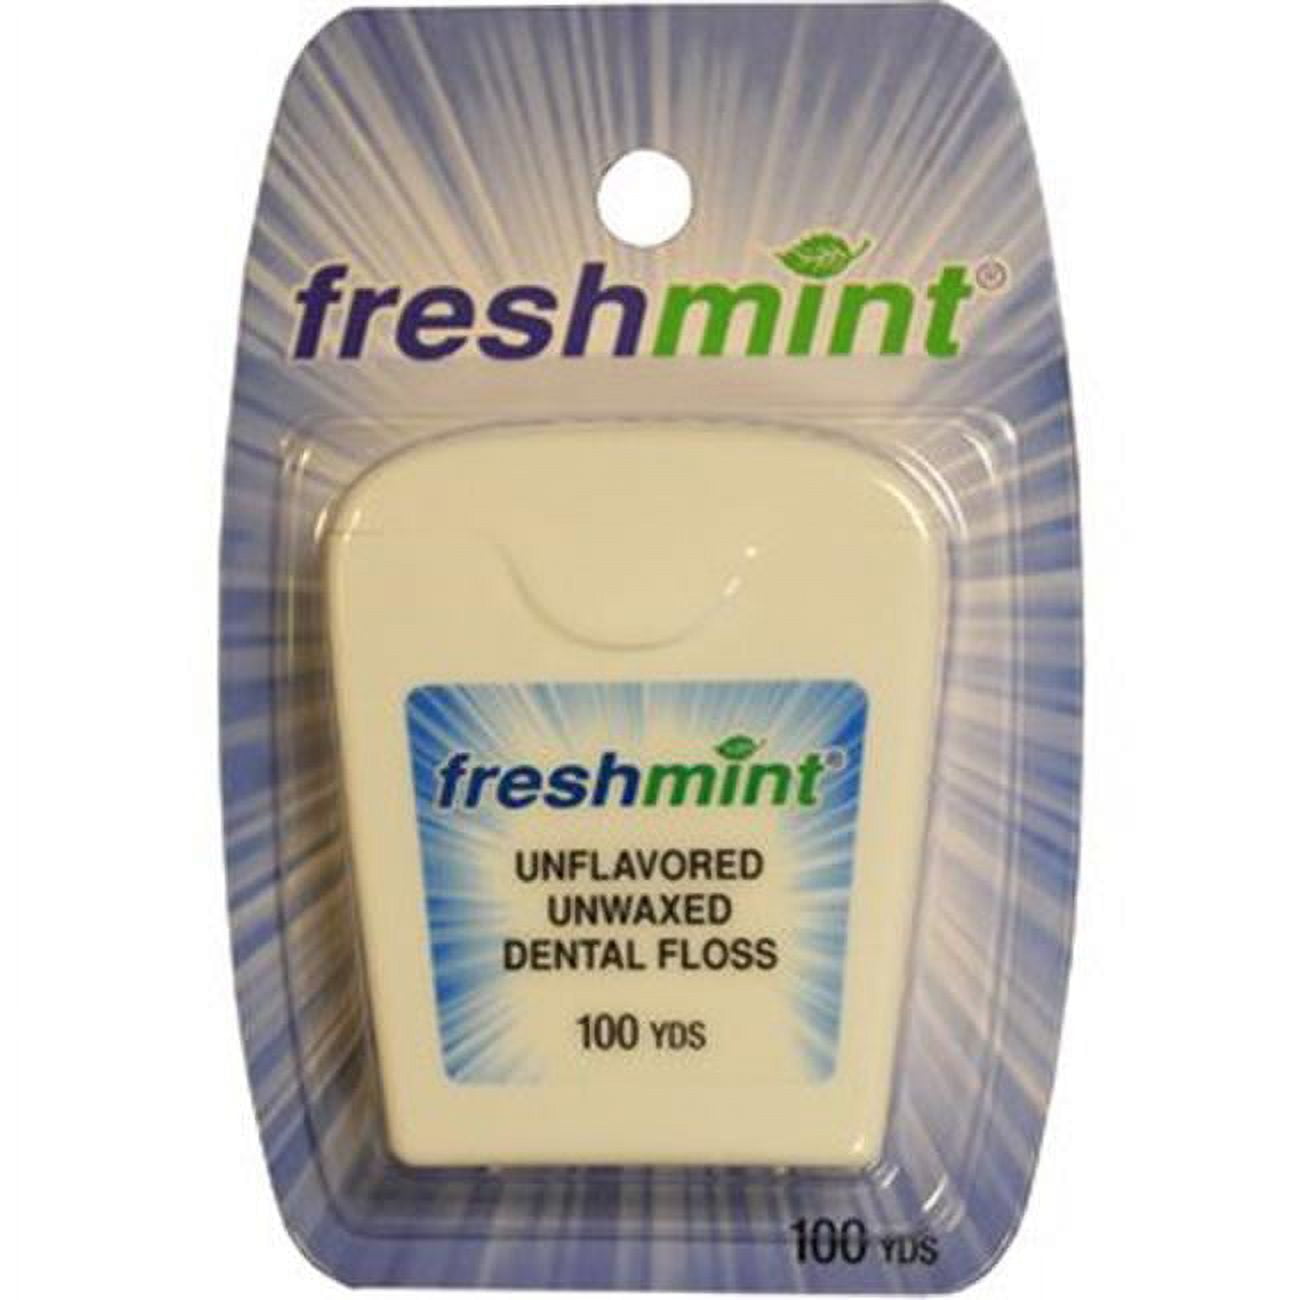 2286446 Freshmint Unwaxed / Unflavored 100 Yd Dental Floss Case Of 72